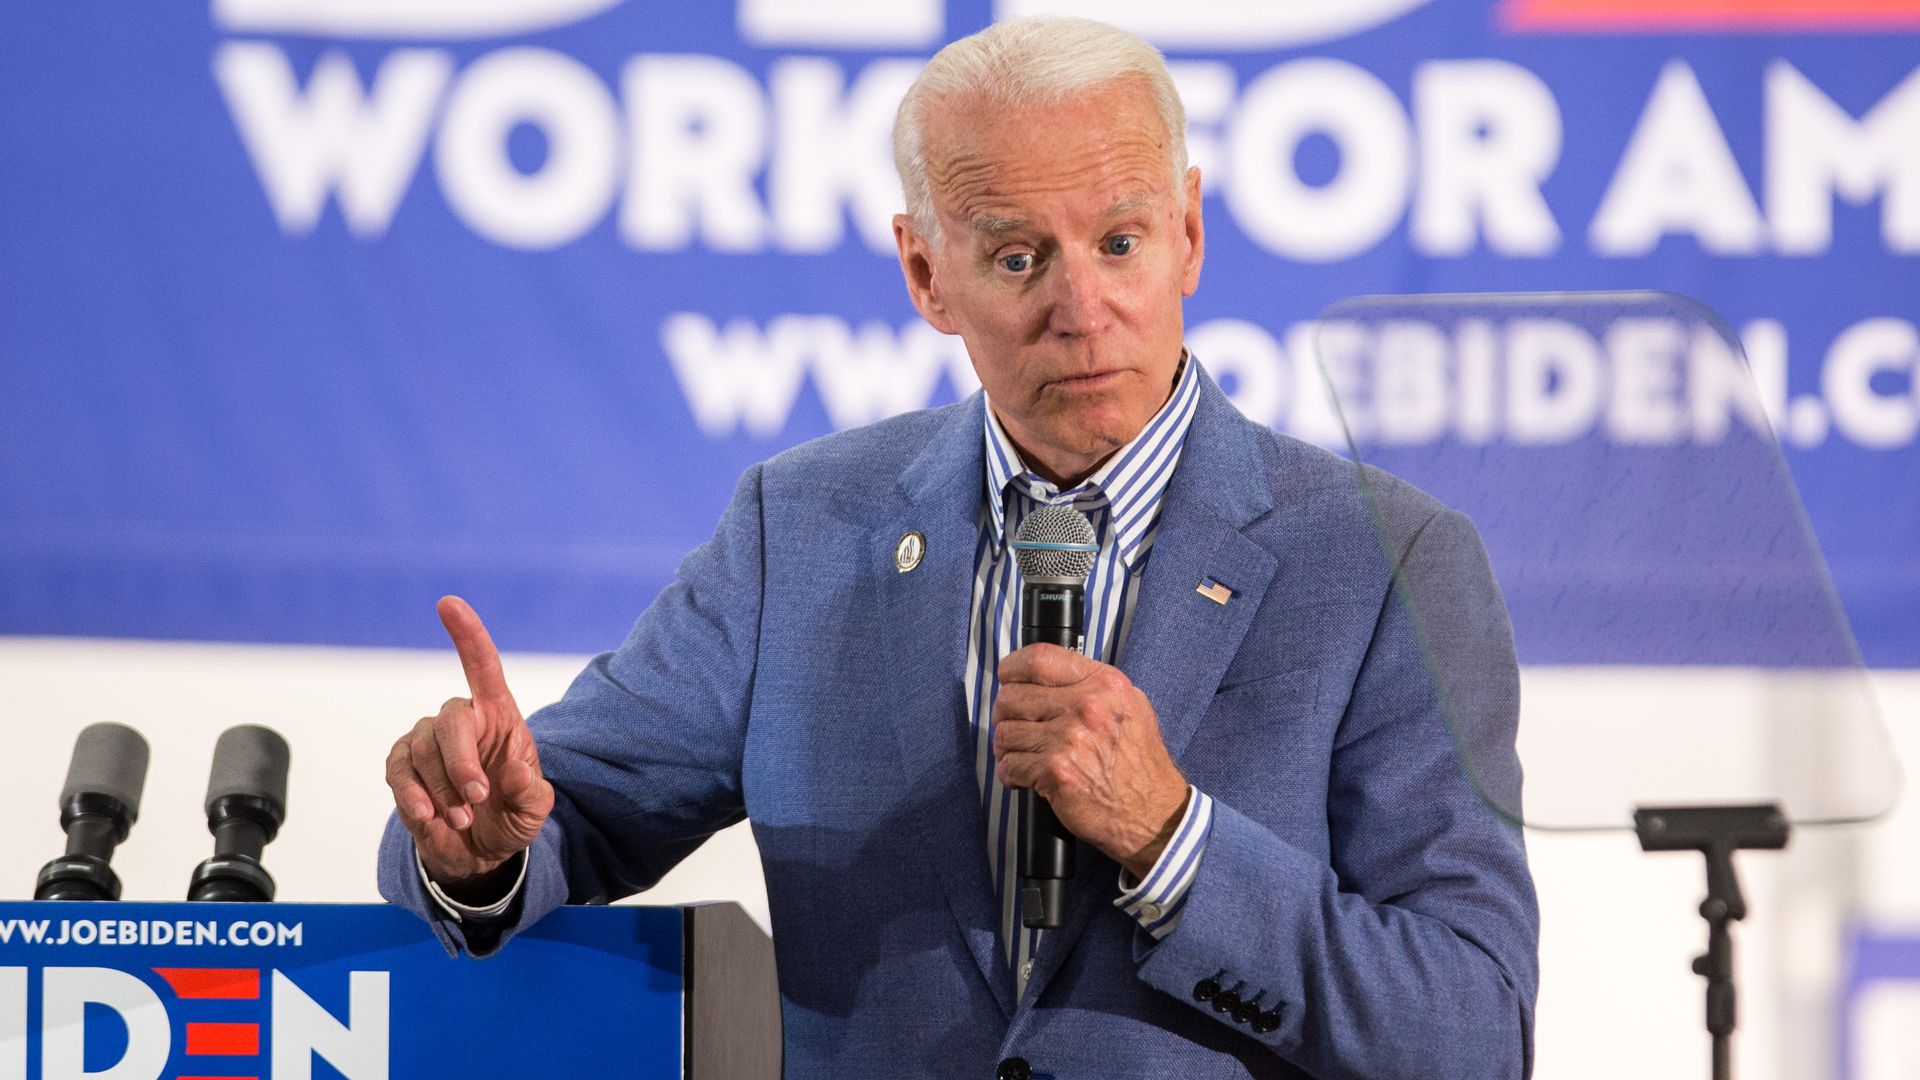 Biden speaking into a microphone and waving his finger.